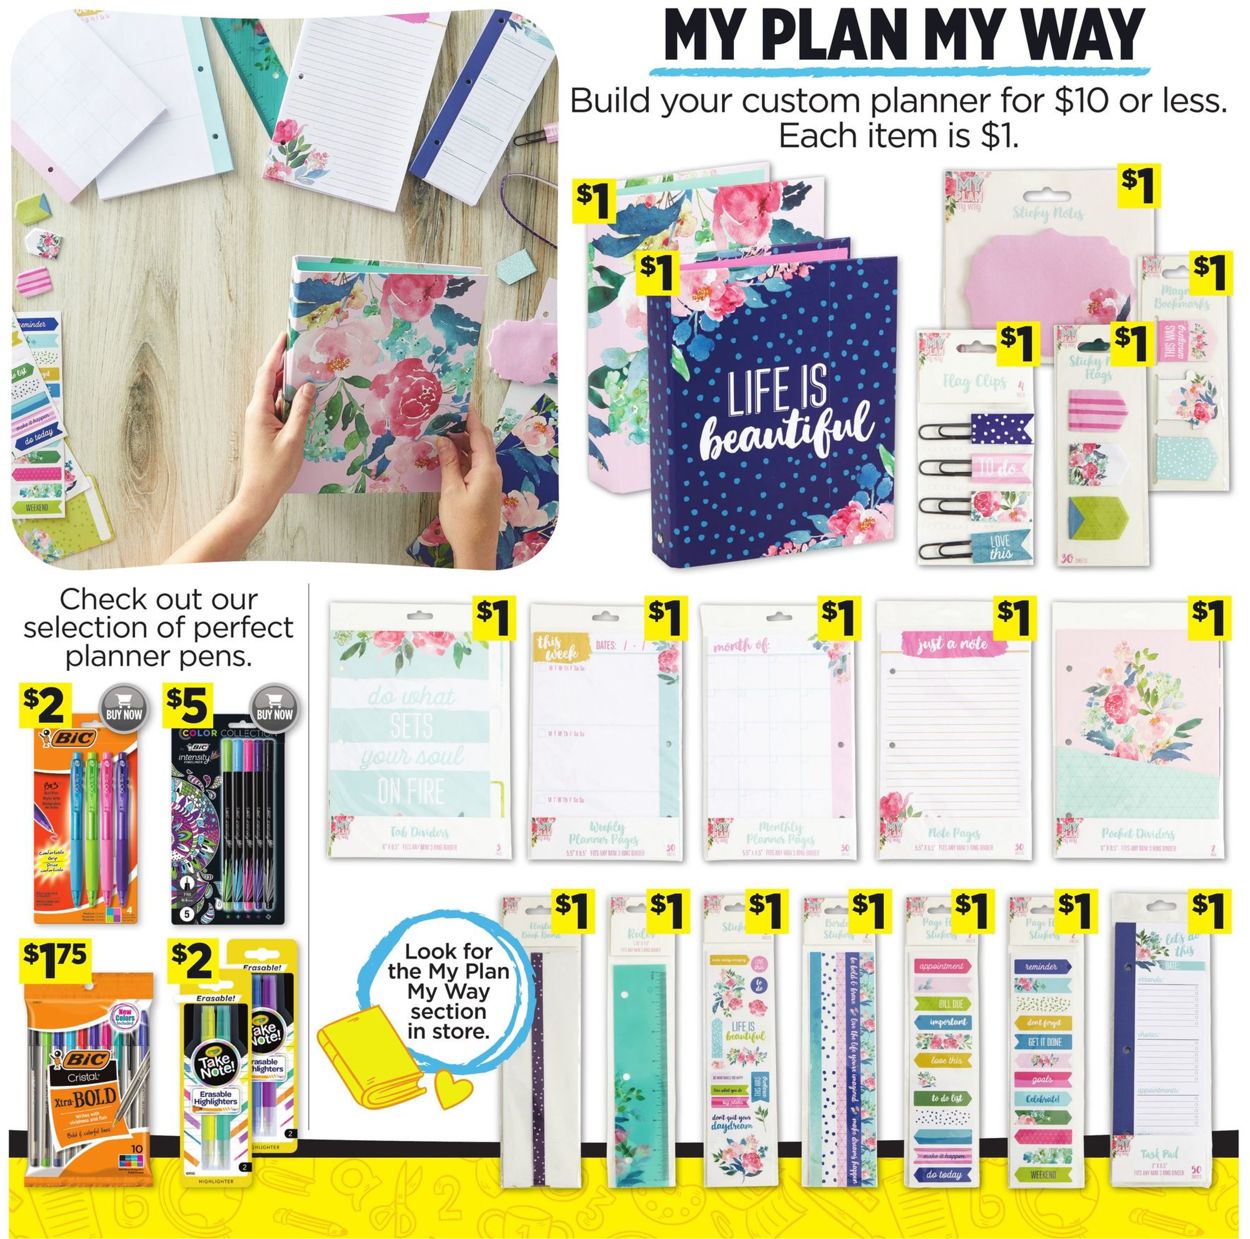 Dollar General Ad from 08/18/2019